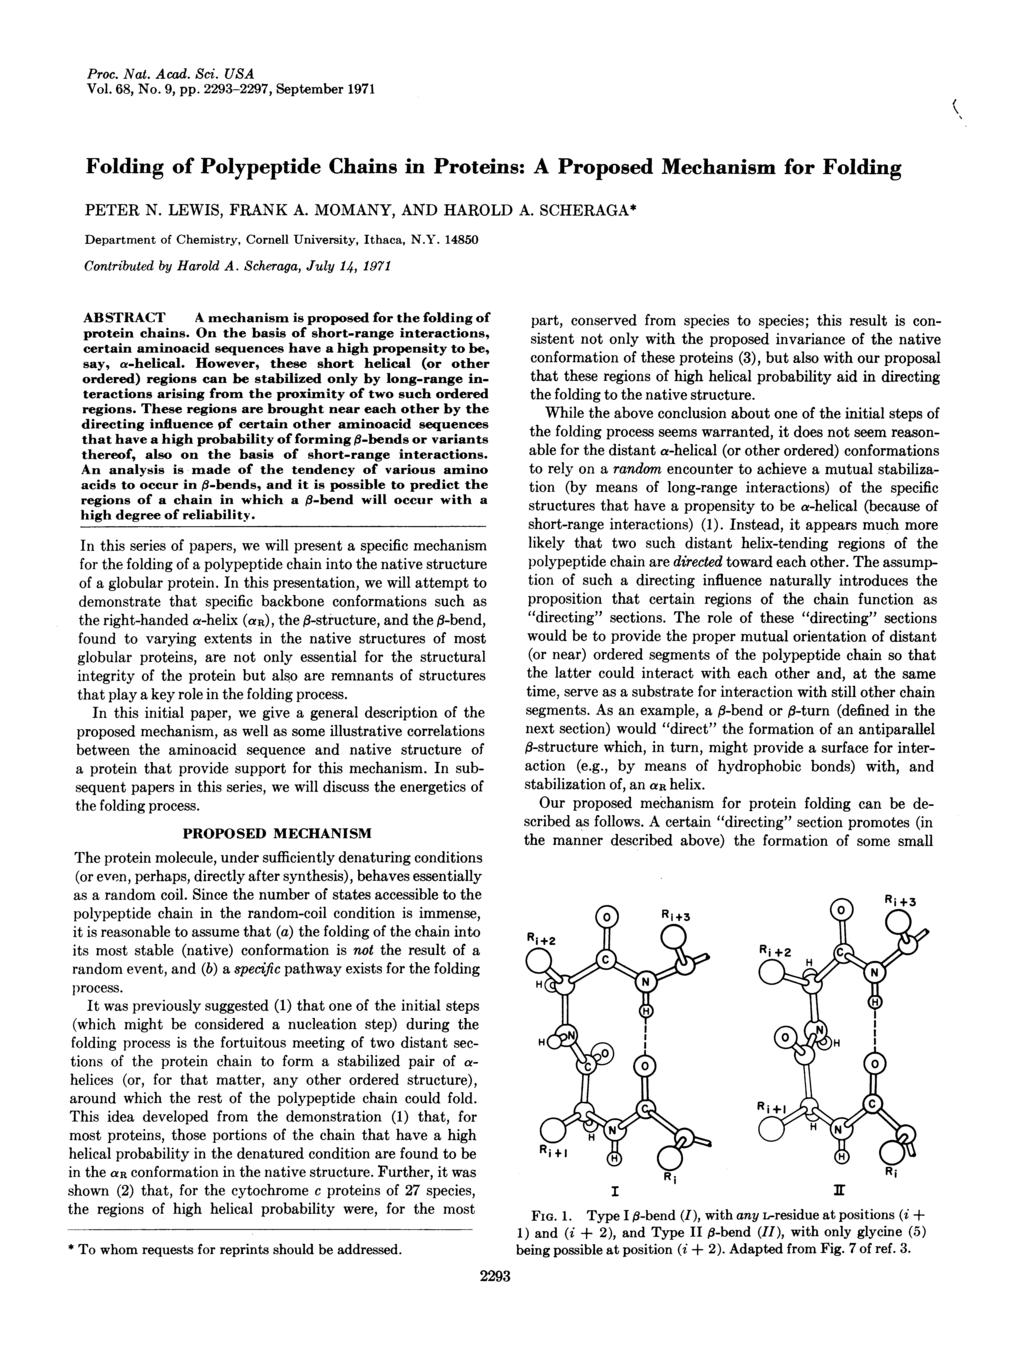 Proc. Nat. Acad. Sci. USA Vol. 68, No. 9, pp. 2293-2297, September 1971 Folding of Polypeptide Chains in Proteins: A Proposed Mechanism for Folding PETER N. LEWS, FRANK A. MOMANY, AND HAROLD A.